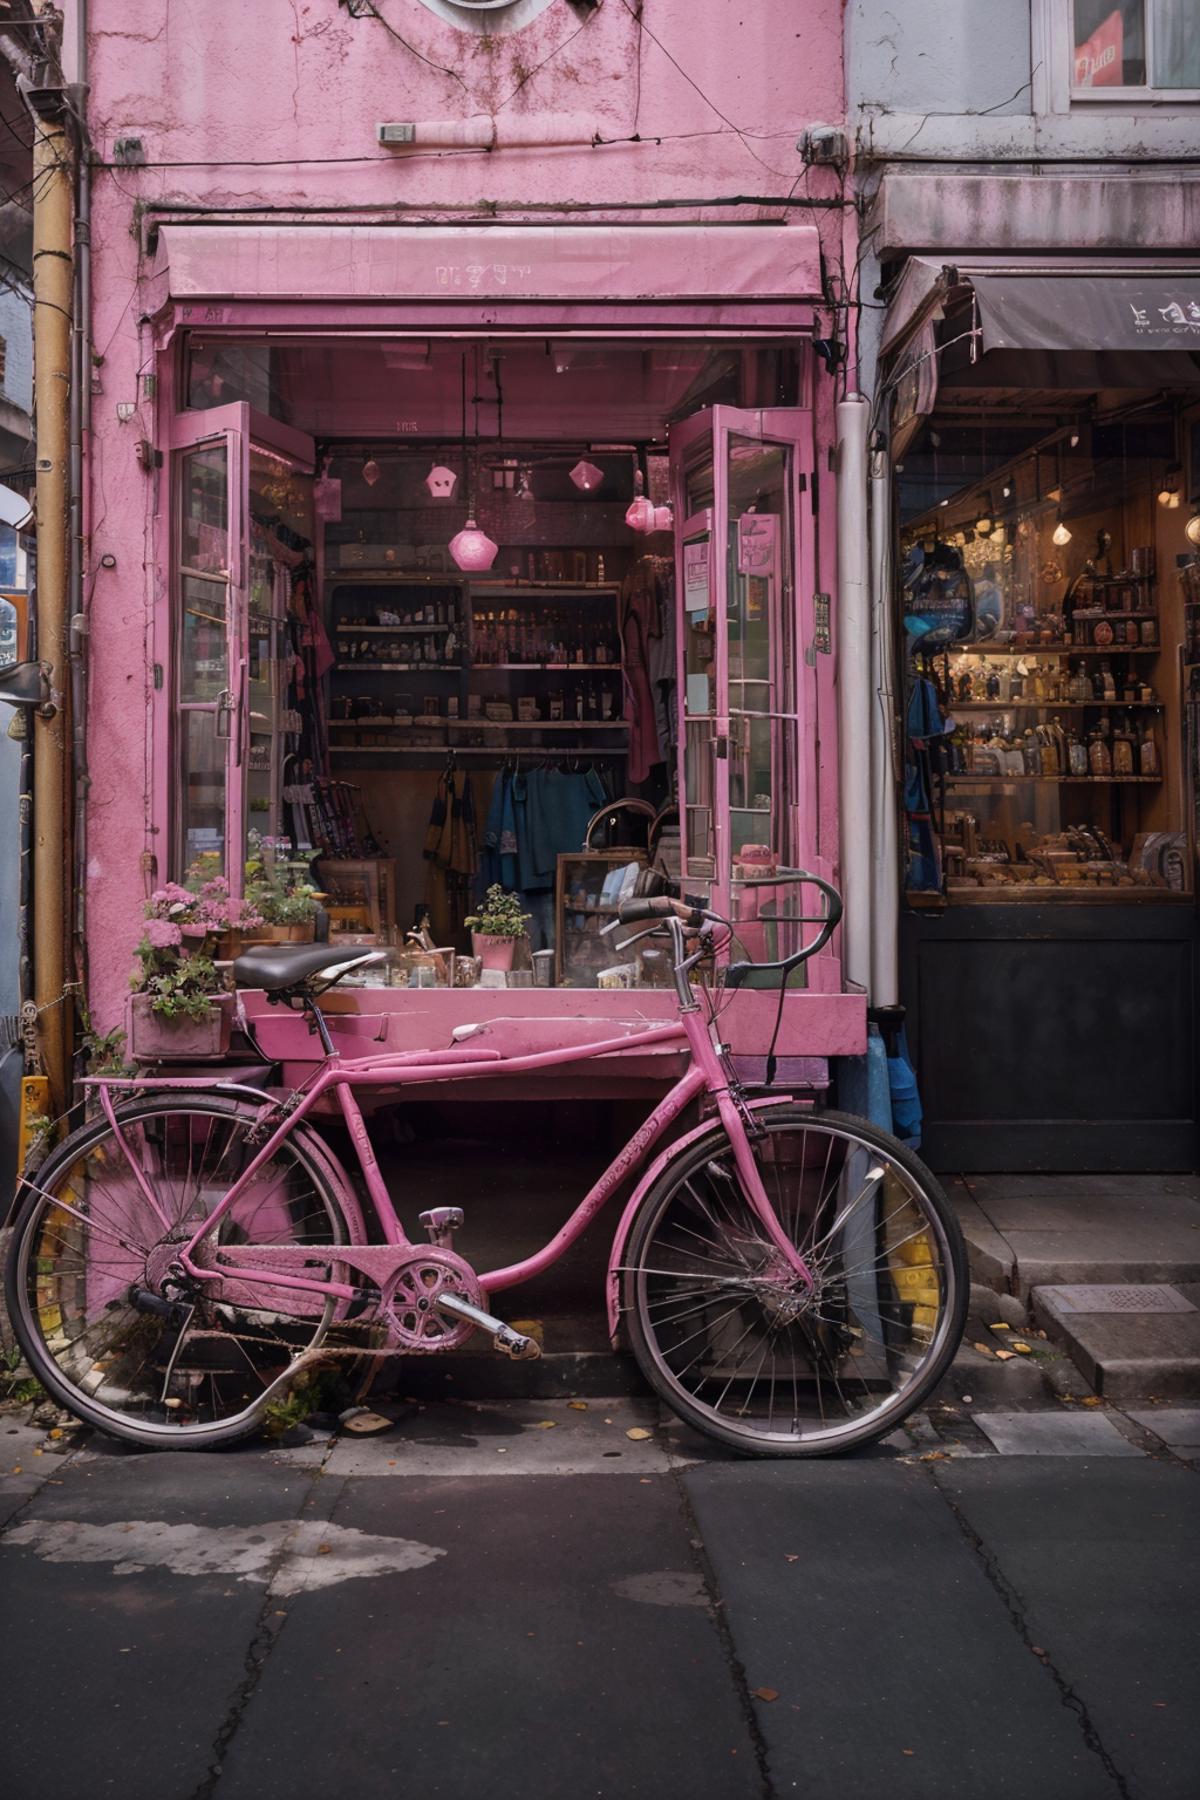 The Pink Bicycle Outside a Shop with Pink Display Windows